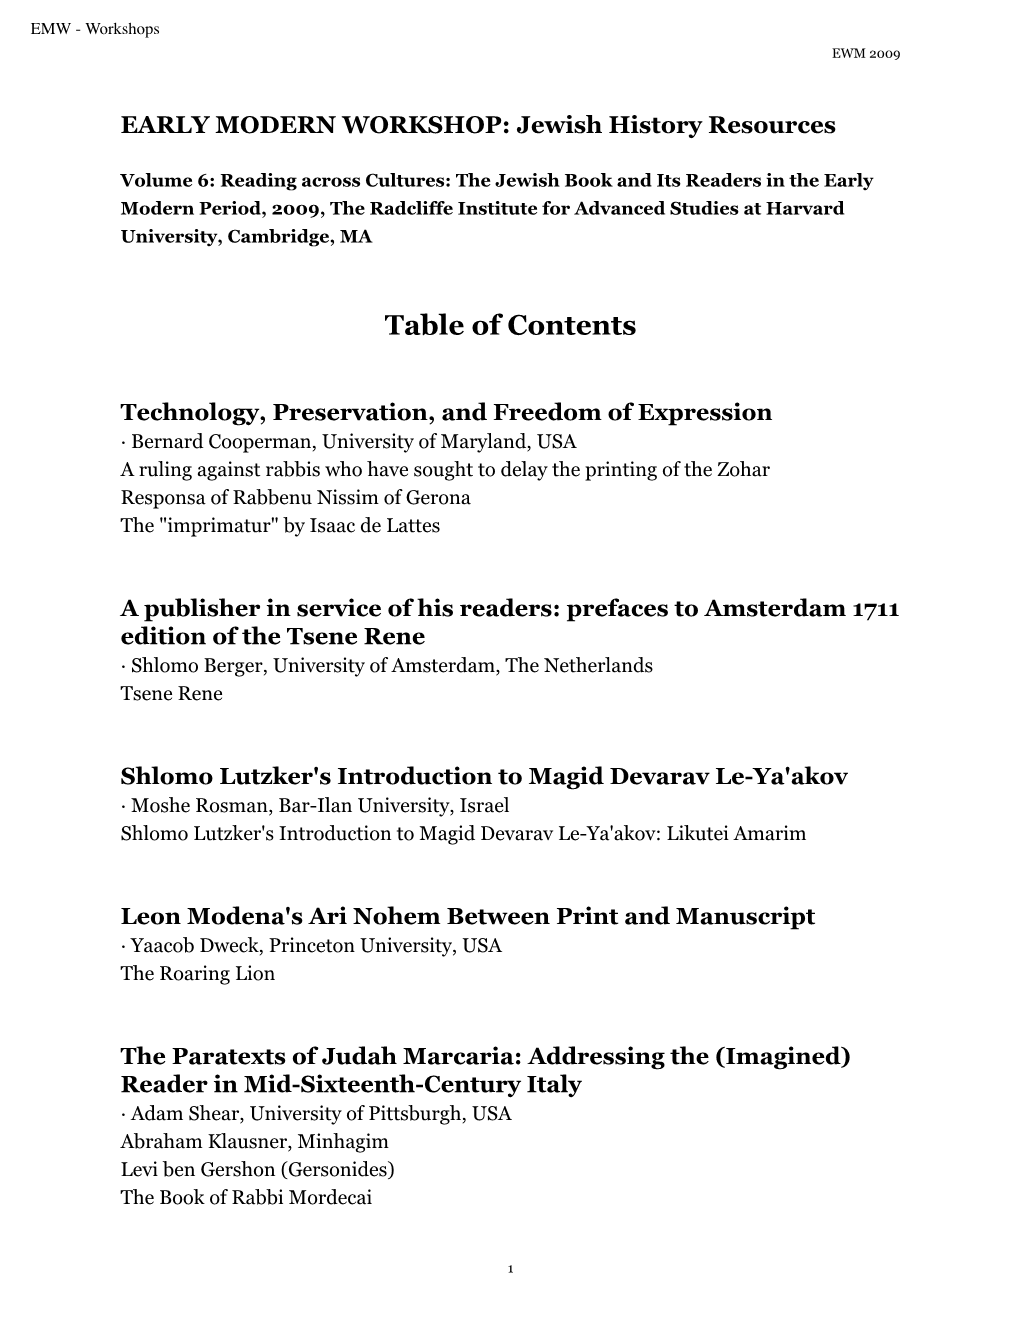 EMW 2009: Reading Across Cultures: the Jewish Book and Its Readers in the Early Modern Period